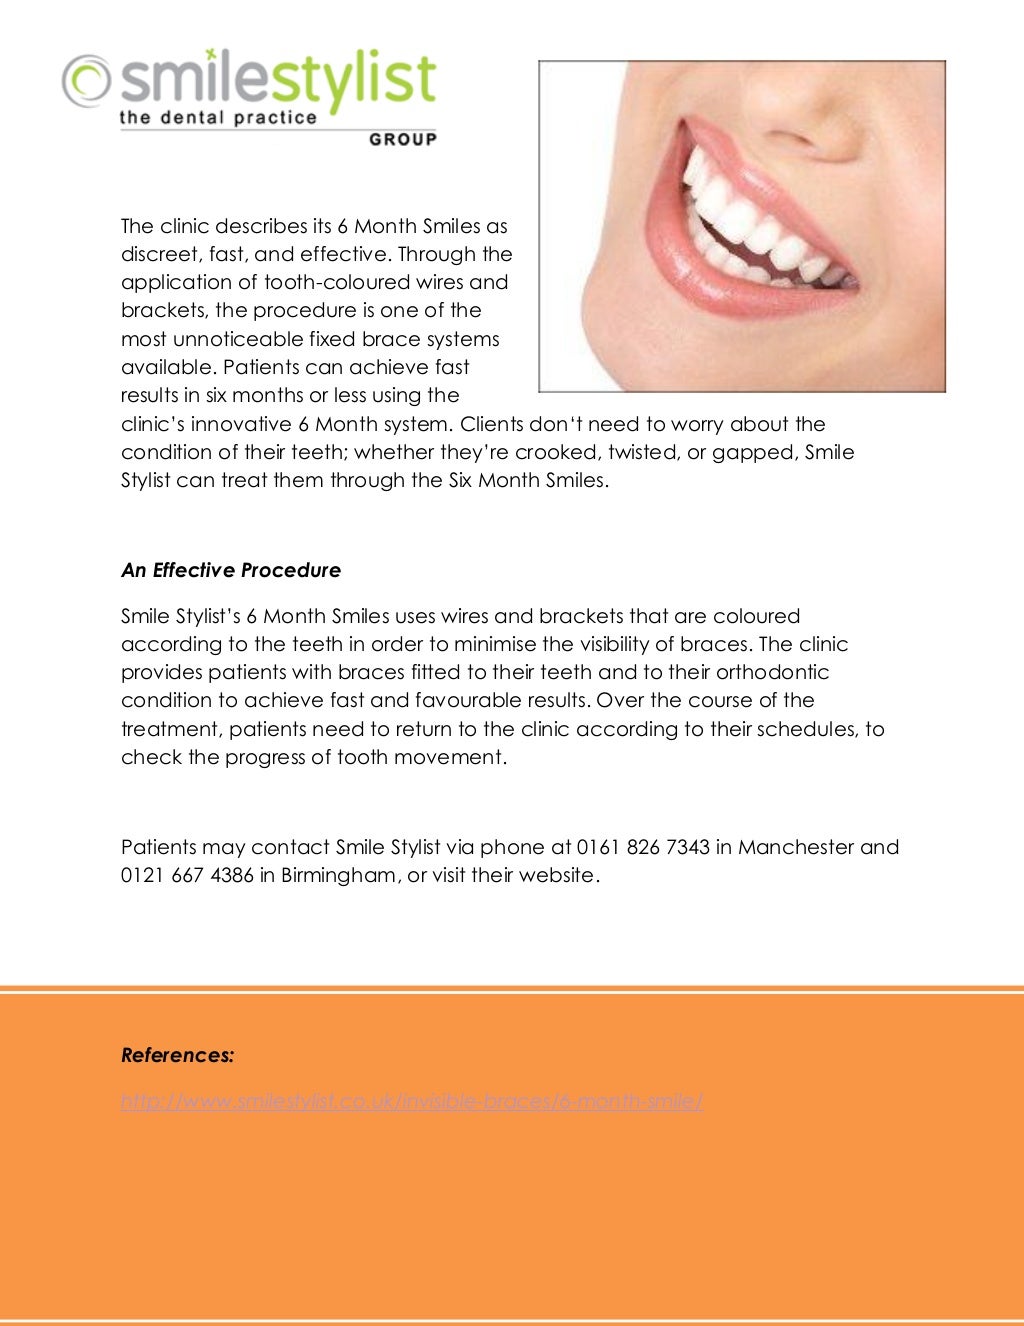 Smilestylist Helping People Achieve The Perfect Smile Within Six Months 